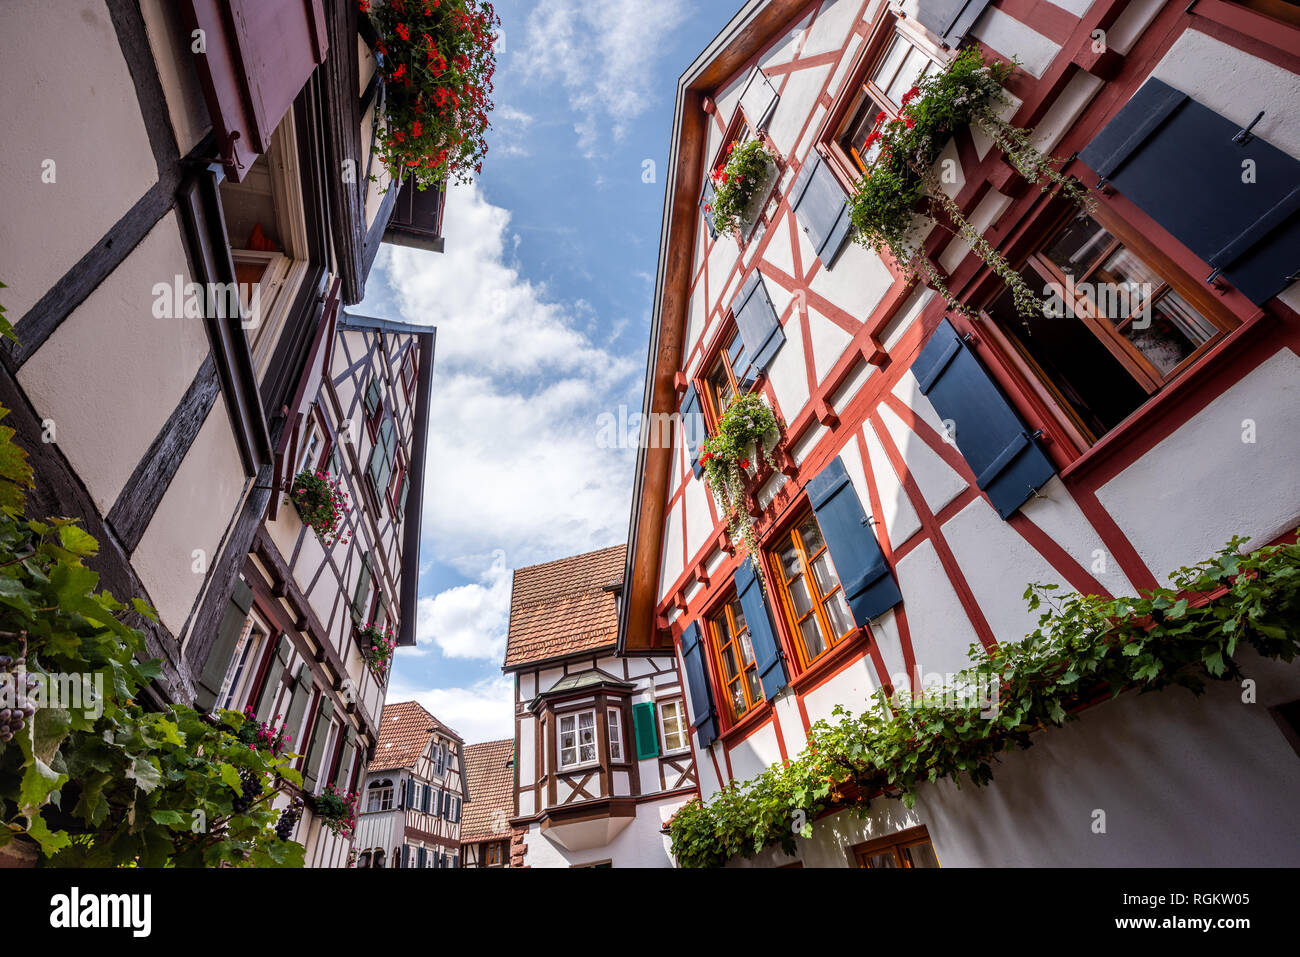 town Schiltach, Black Forest, Germany, narrow lane with half-timbered houses of a historical old town with wine and flower decoration Stock Photo